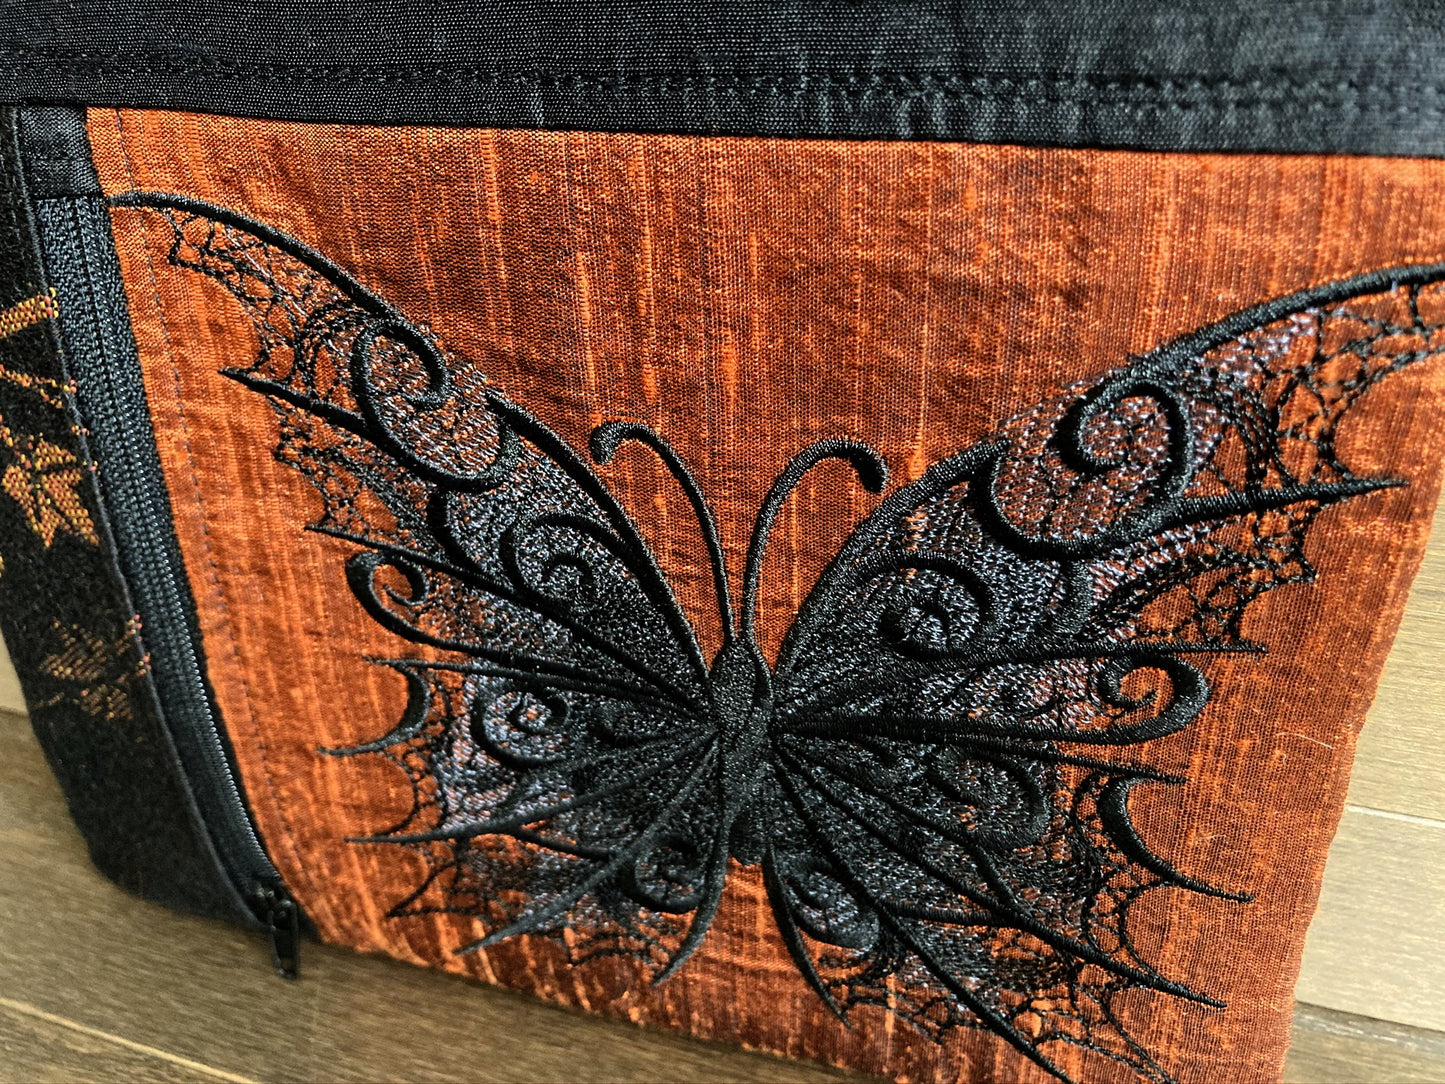 Shadows and Candlelight Butterfly Double Pocket Zipper Bag